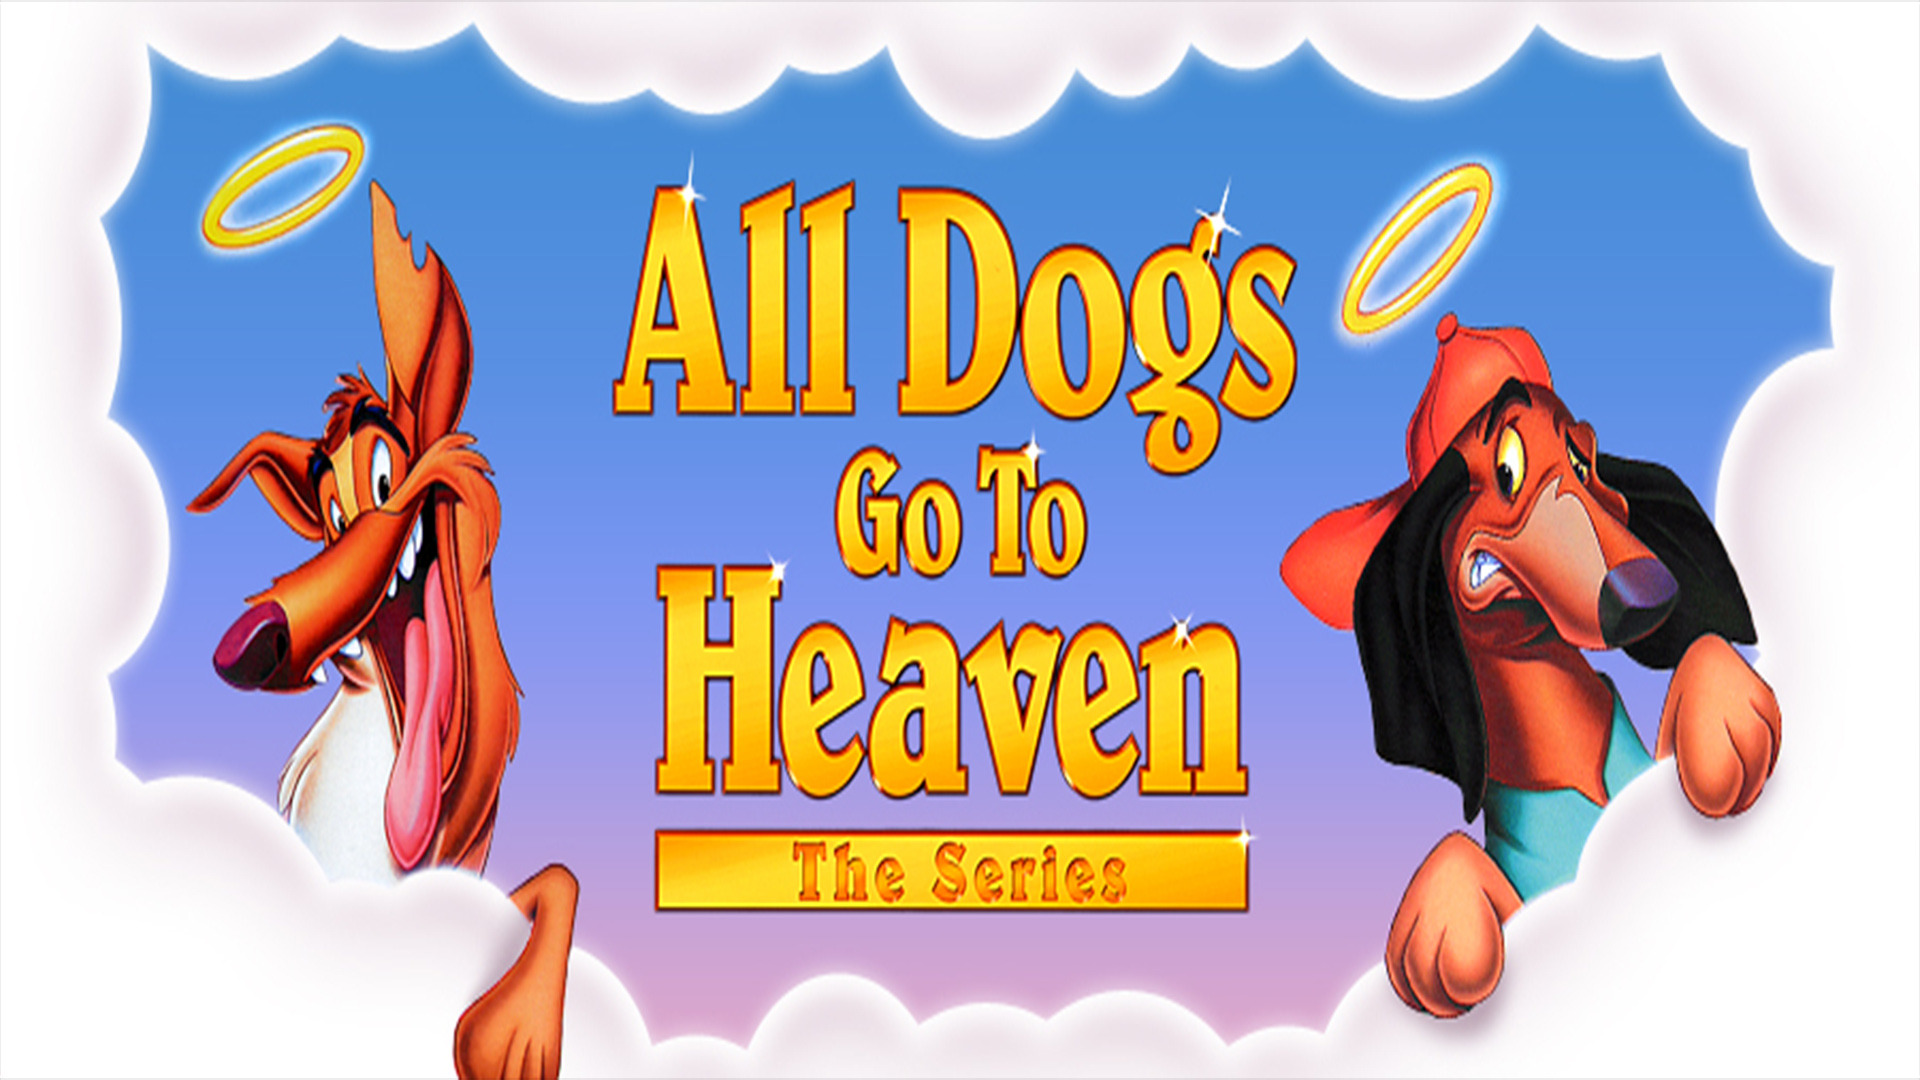 Show All Dogs Go to Heaven